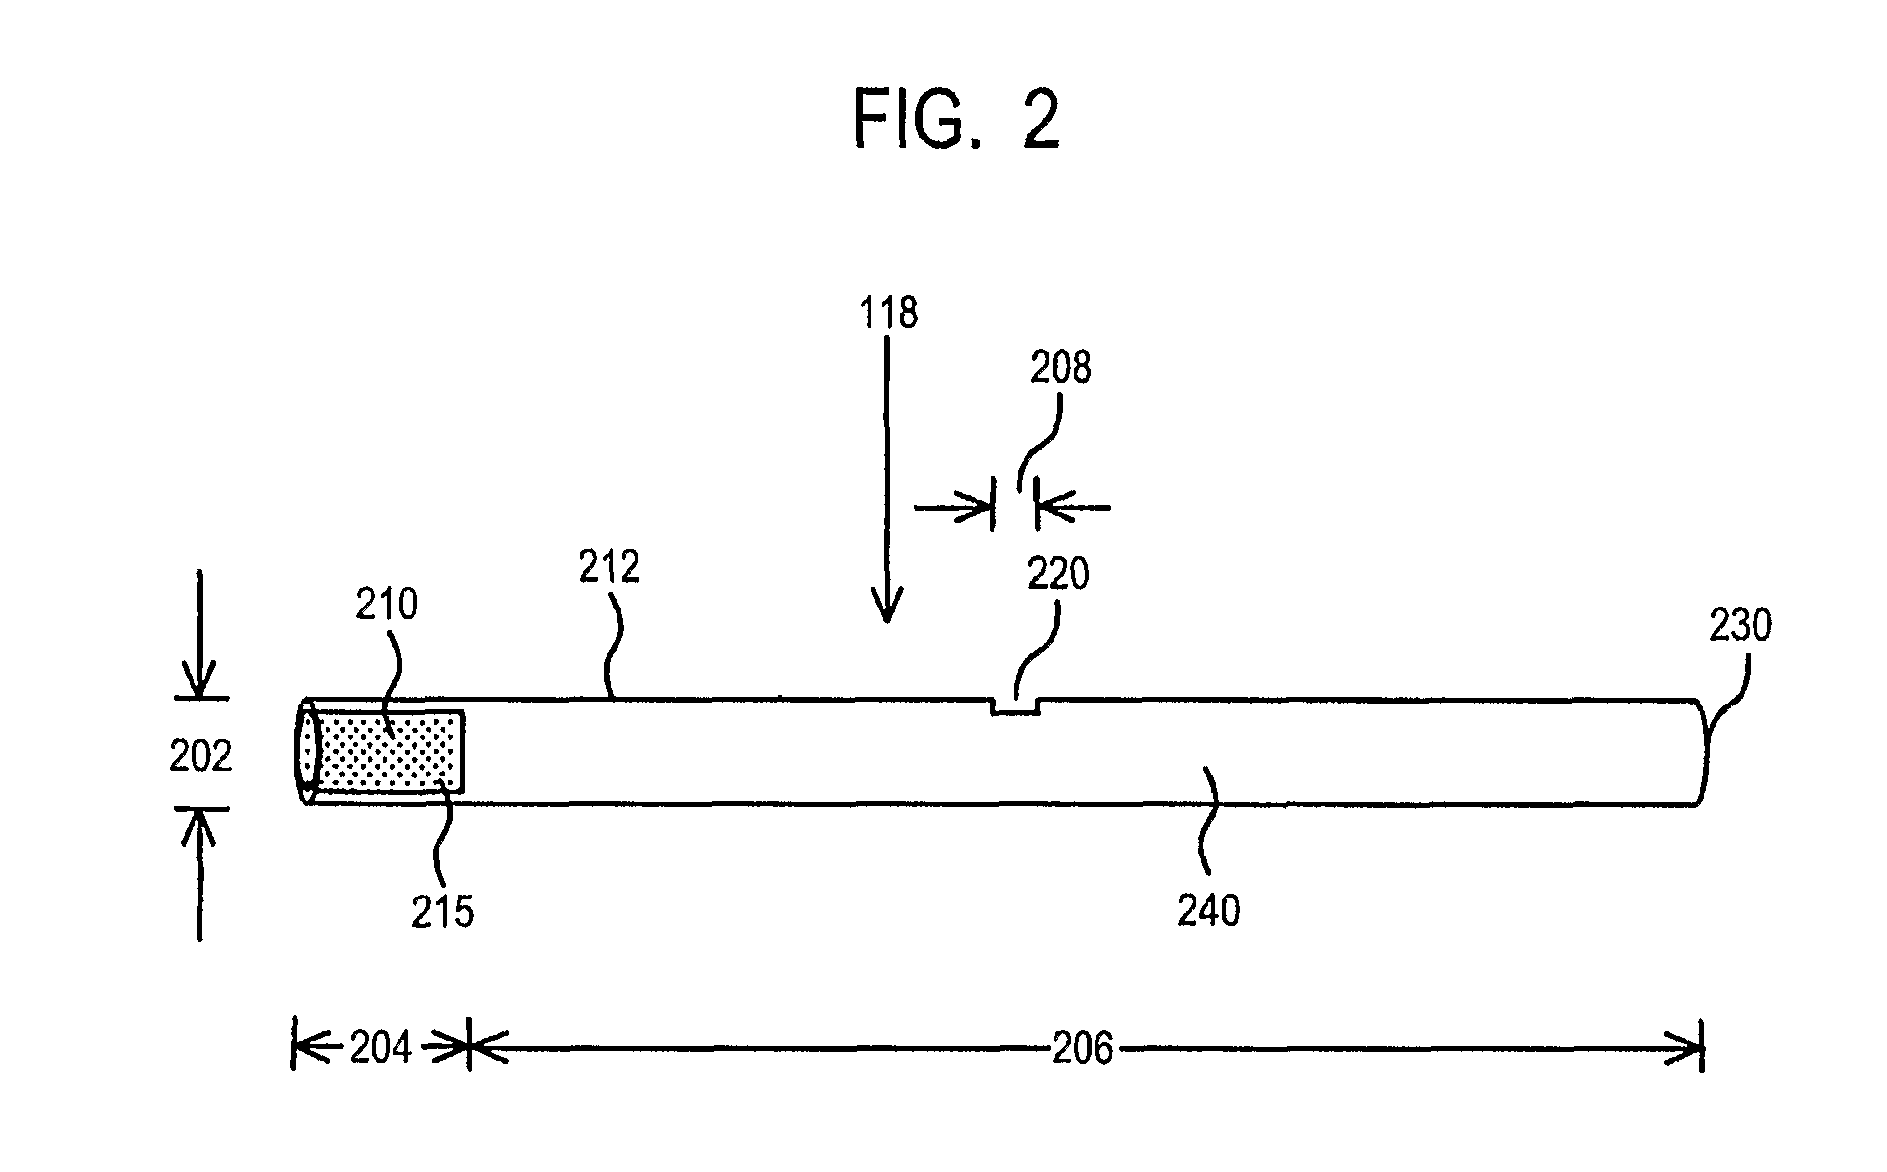 Portable vaporizing device and method for inhalation and/or aromatherapy without combustion